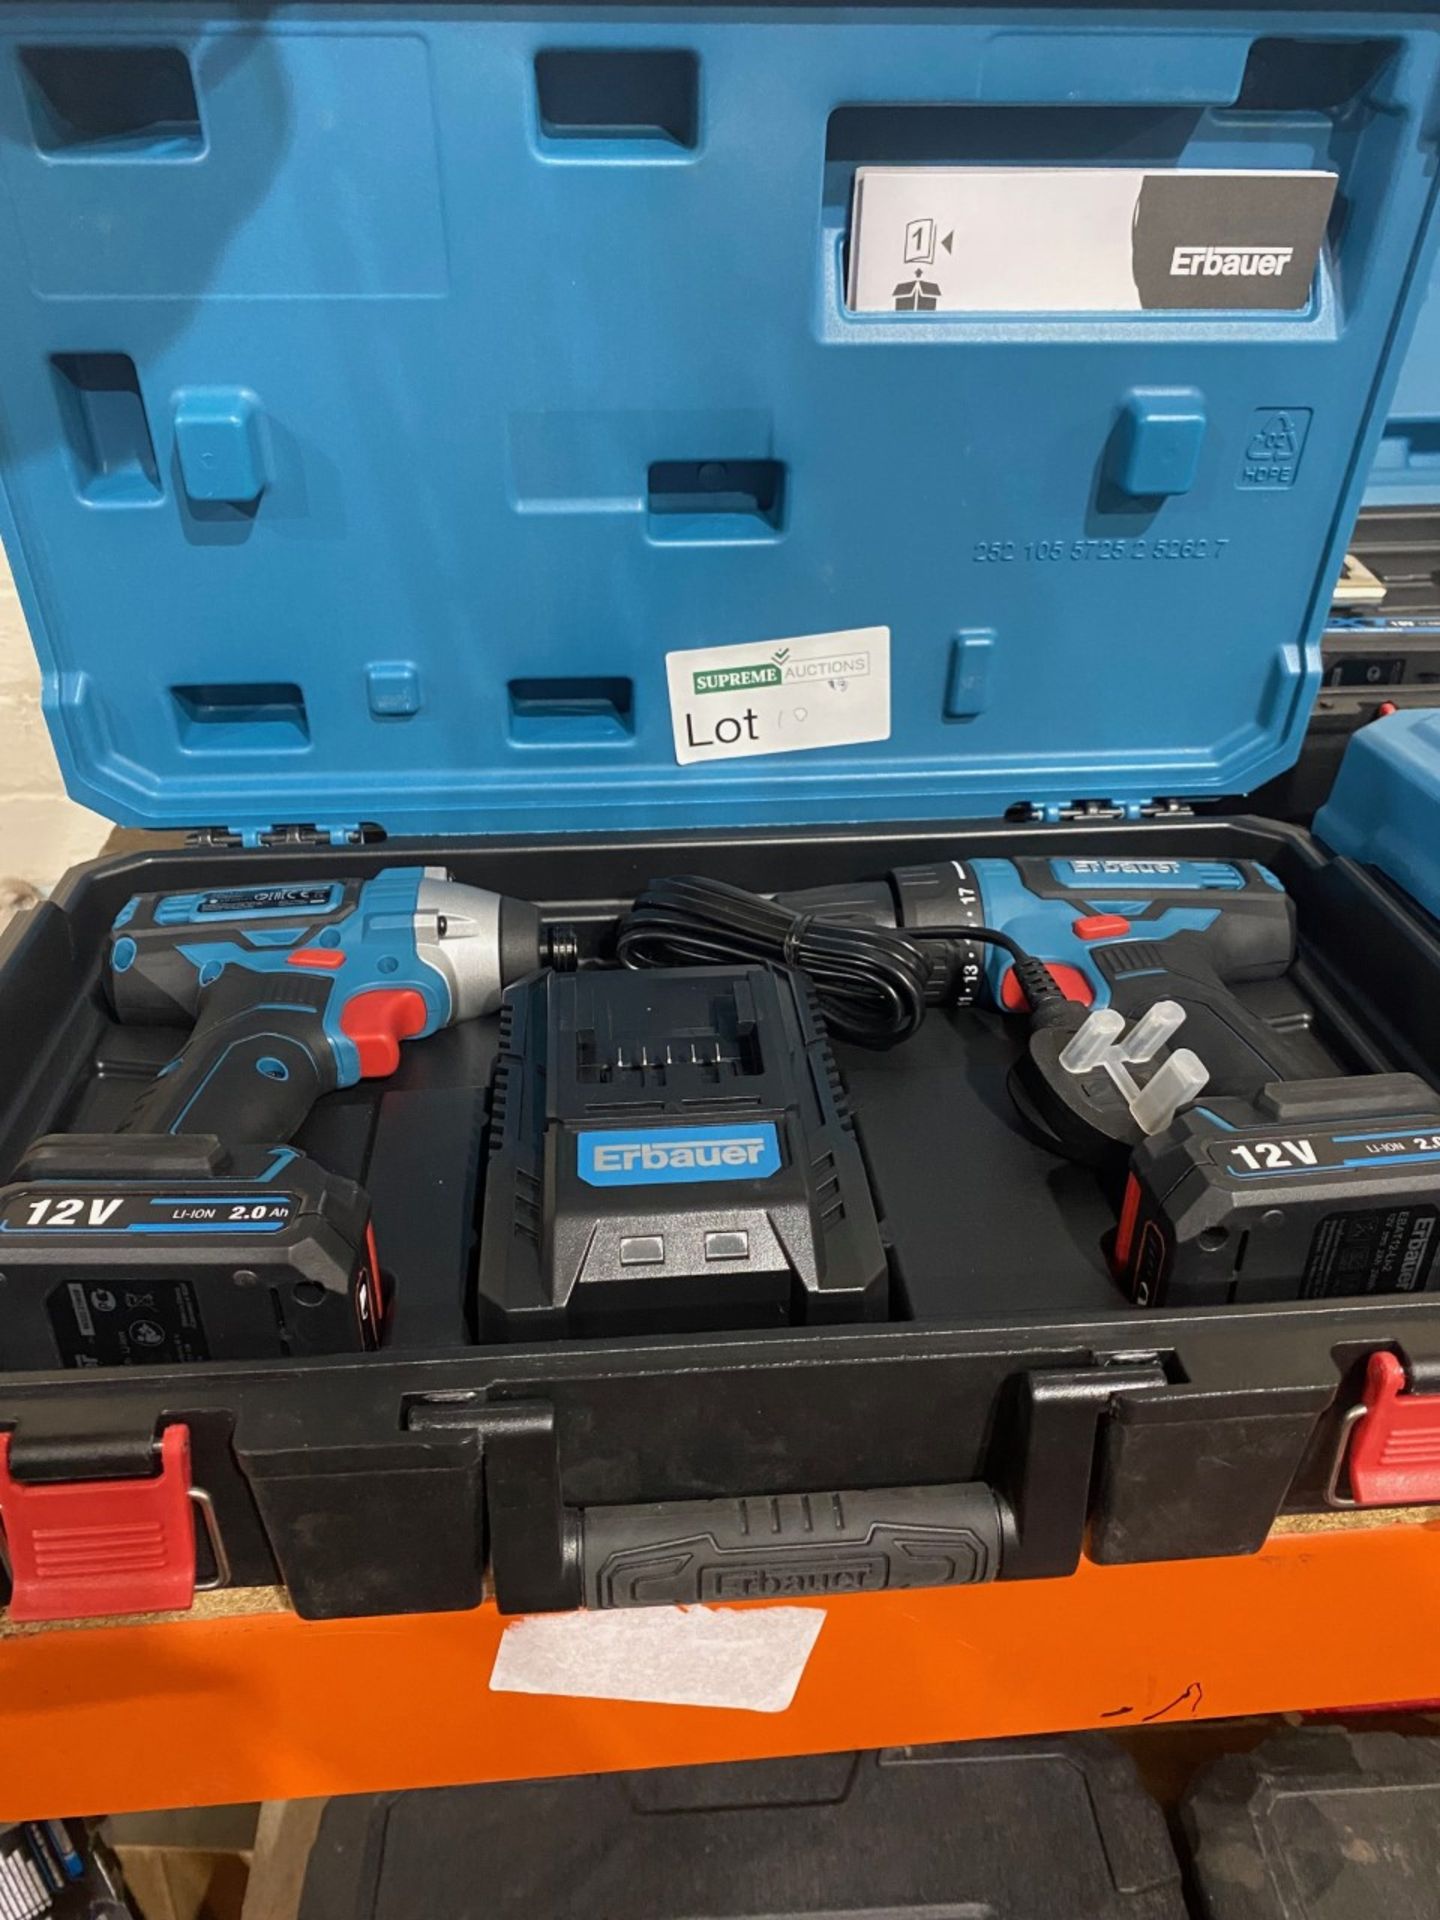 ERBAUER EDD12-LI-2 12V 2.0AH LI-ION CORDLESS TWIN PACK COMES WITH 2 BATTEREIS, CHARGER AND CARRY